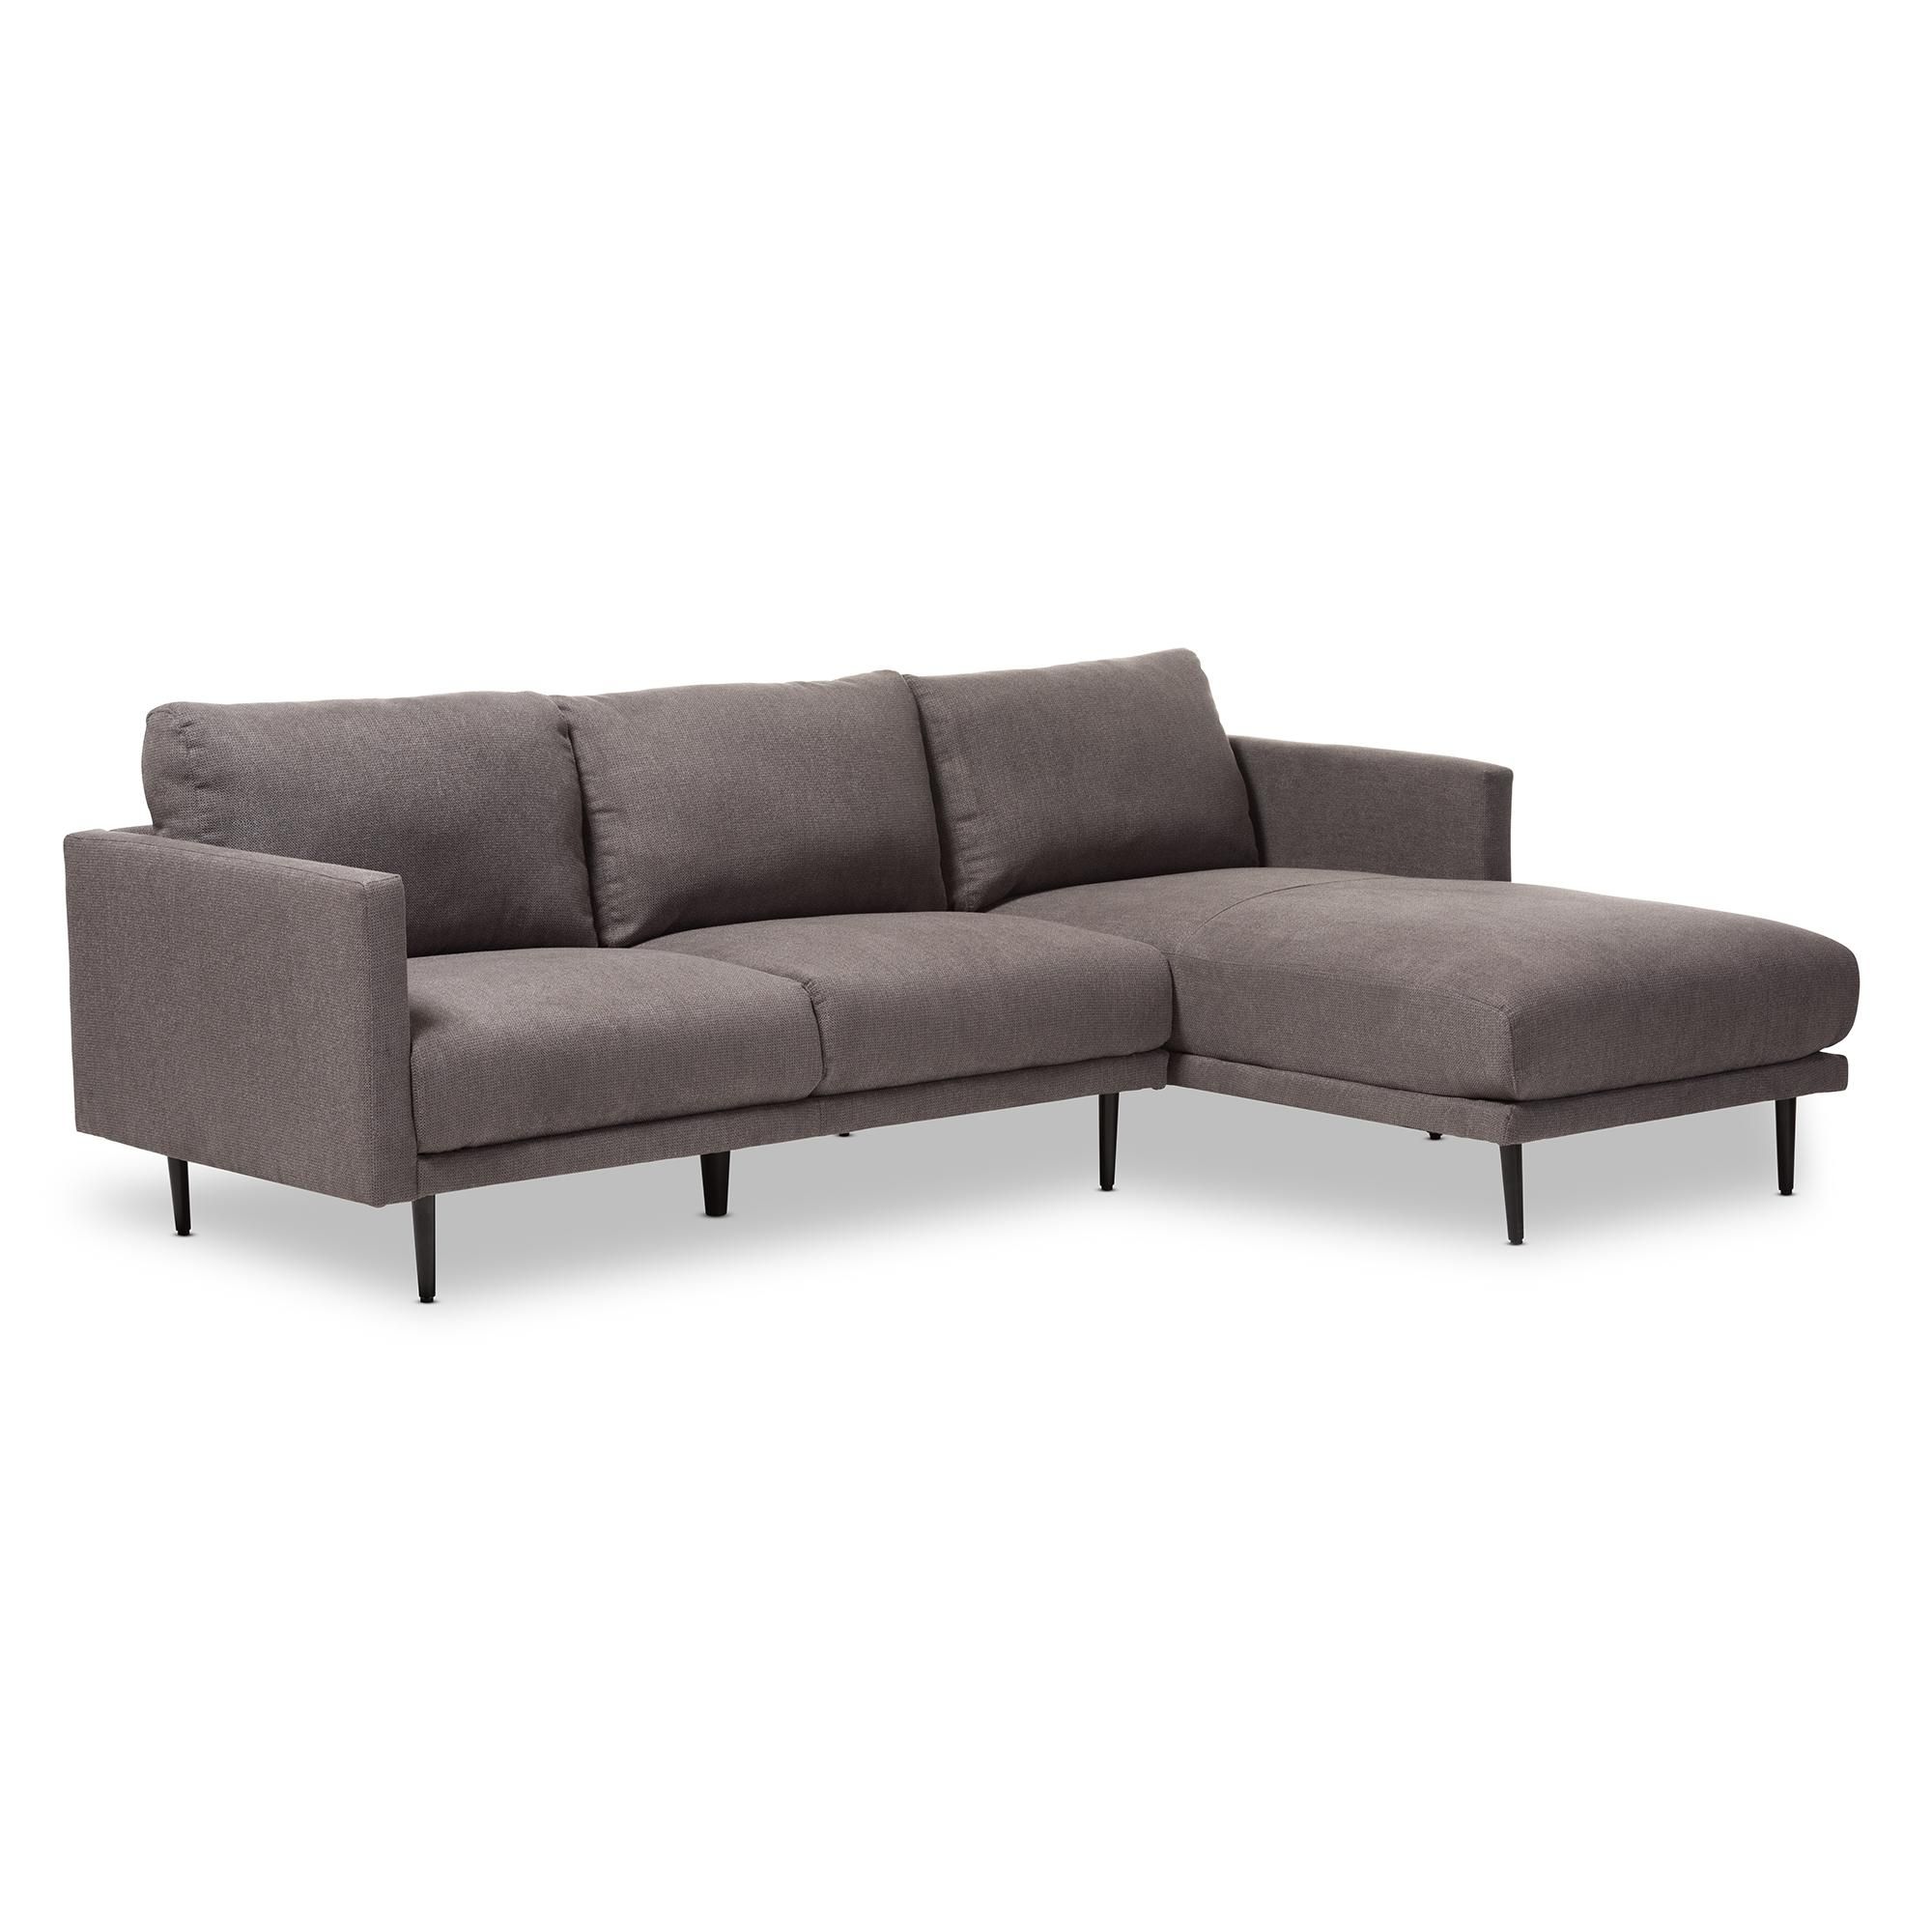 Furniture: Sears Canada Couches | Sears Couch | Sectional Sofa With Regard To Sears Sofa (View 5 of 20)